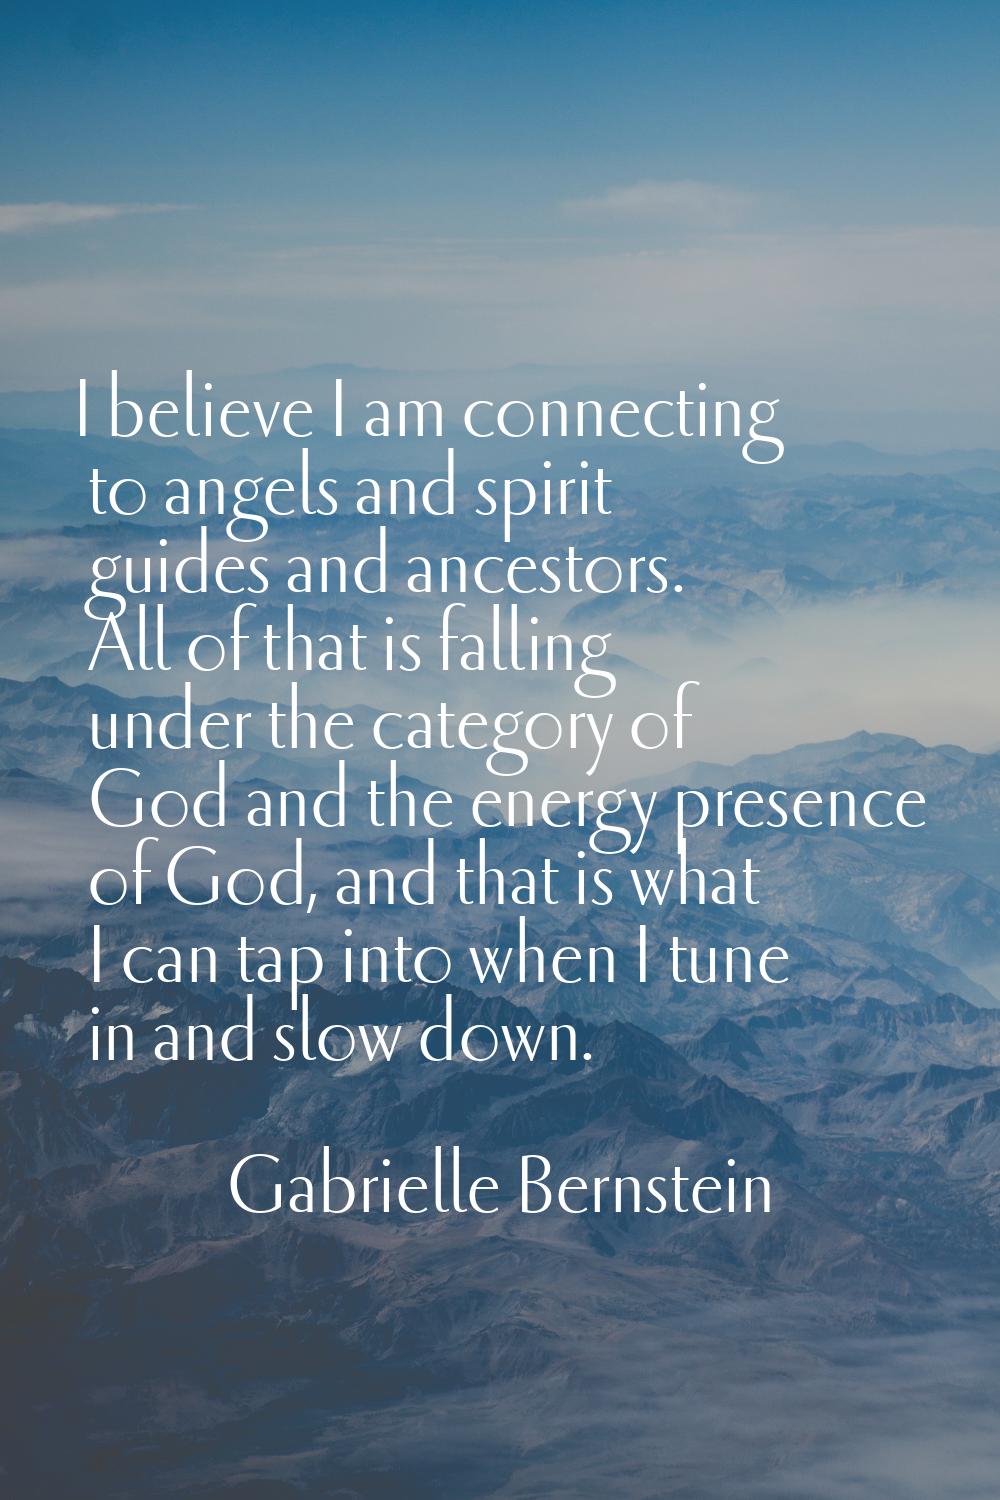 I believe I am connecting to angels and spirit guides and ancestors. All of that is falling under t